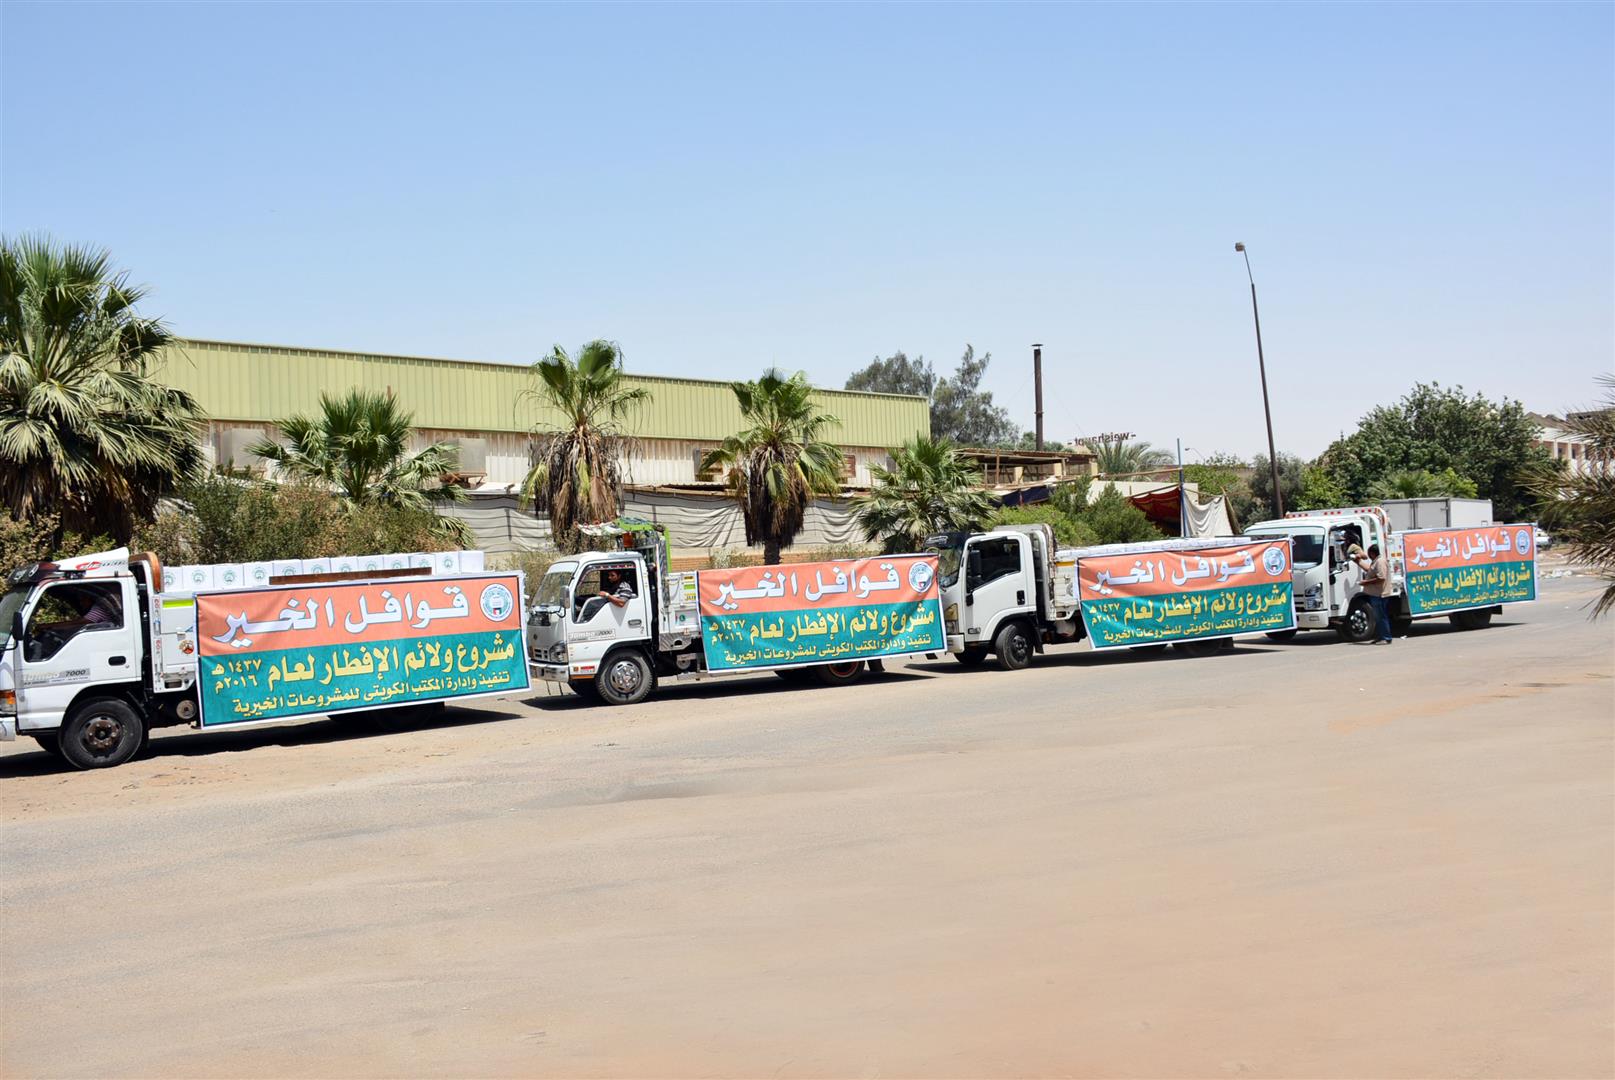 Kuwaiti Office for Charity distributes Iftar meals in Egypt